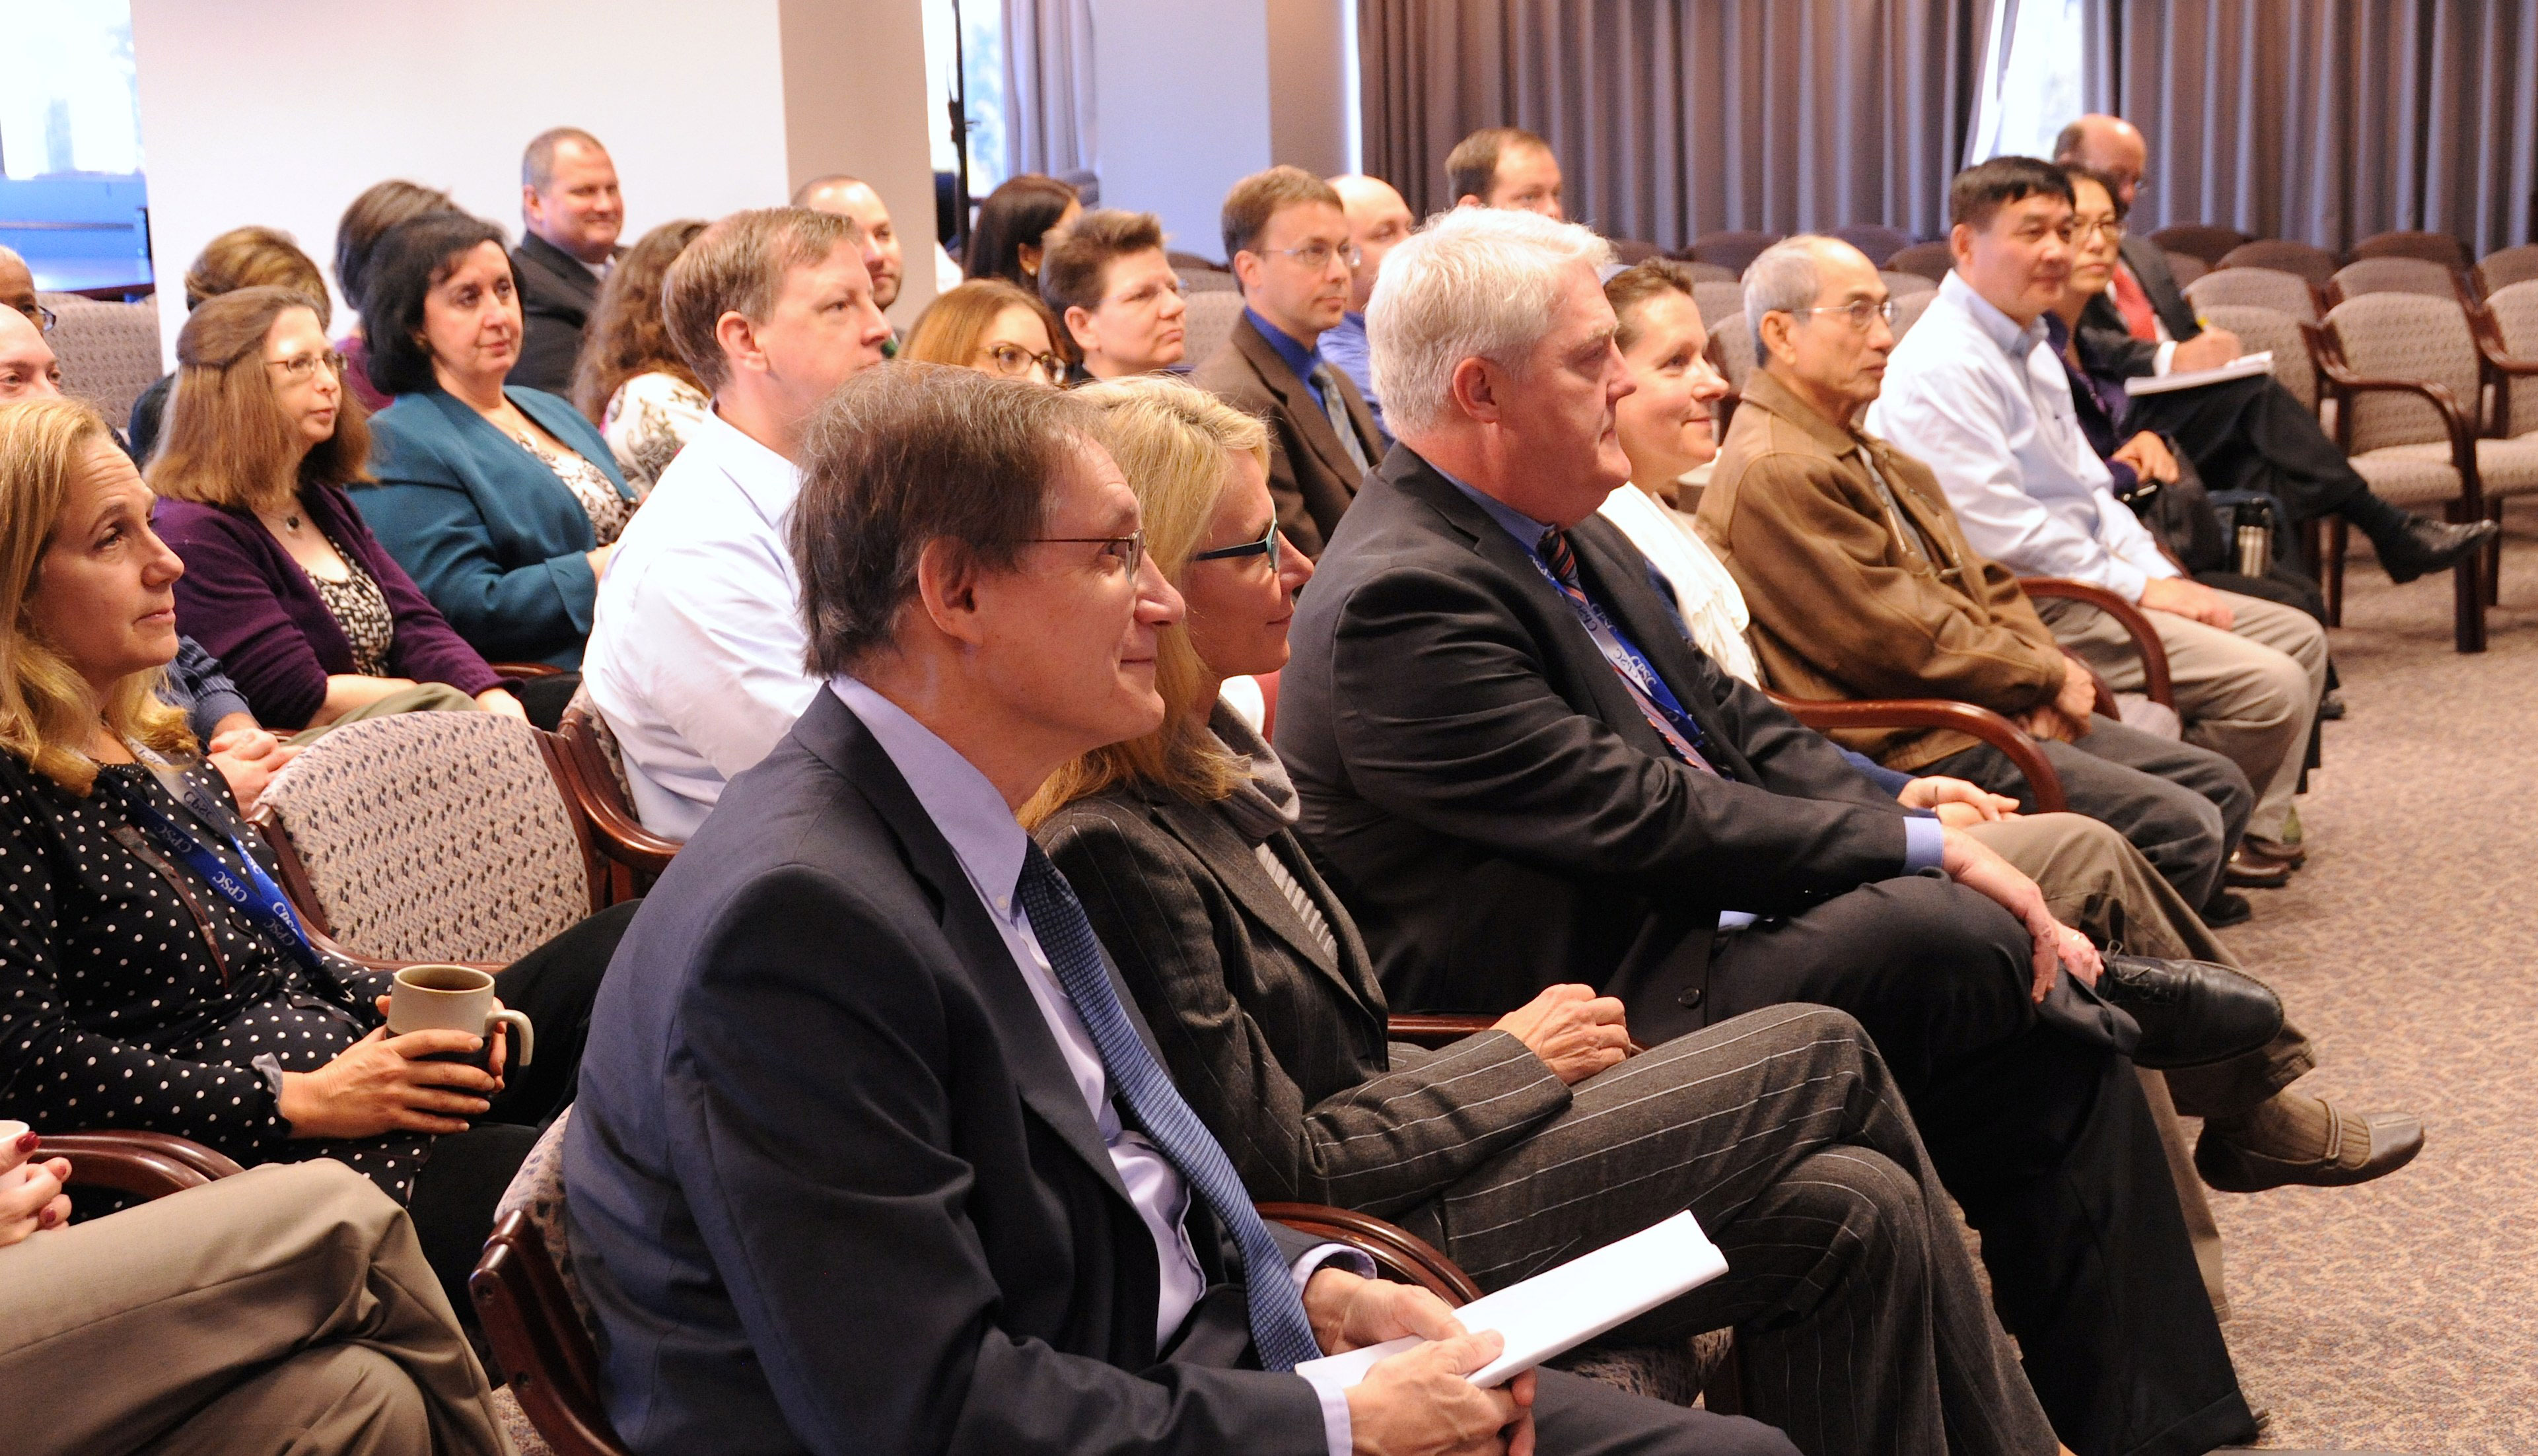 Commissioner Adler, Commissioner Robinson and other members of the audience listen to the winners present their apps.